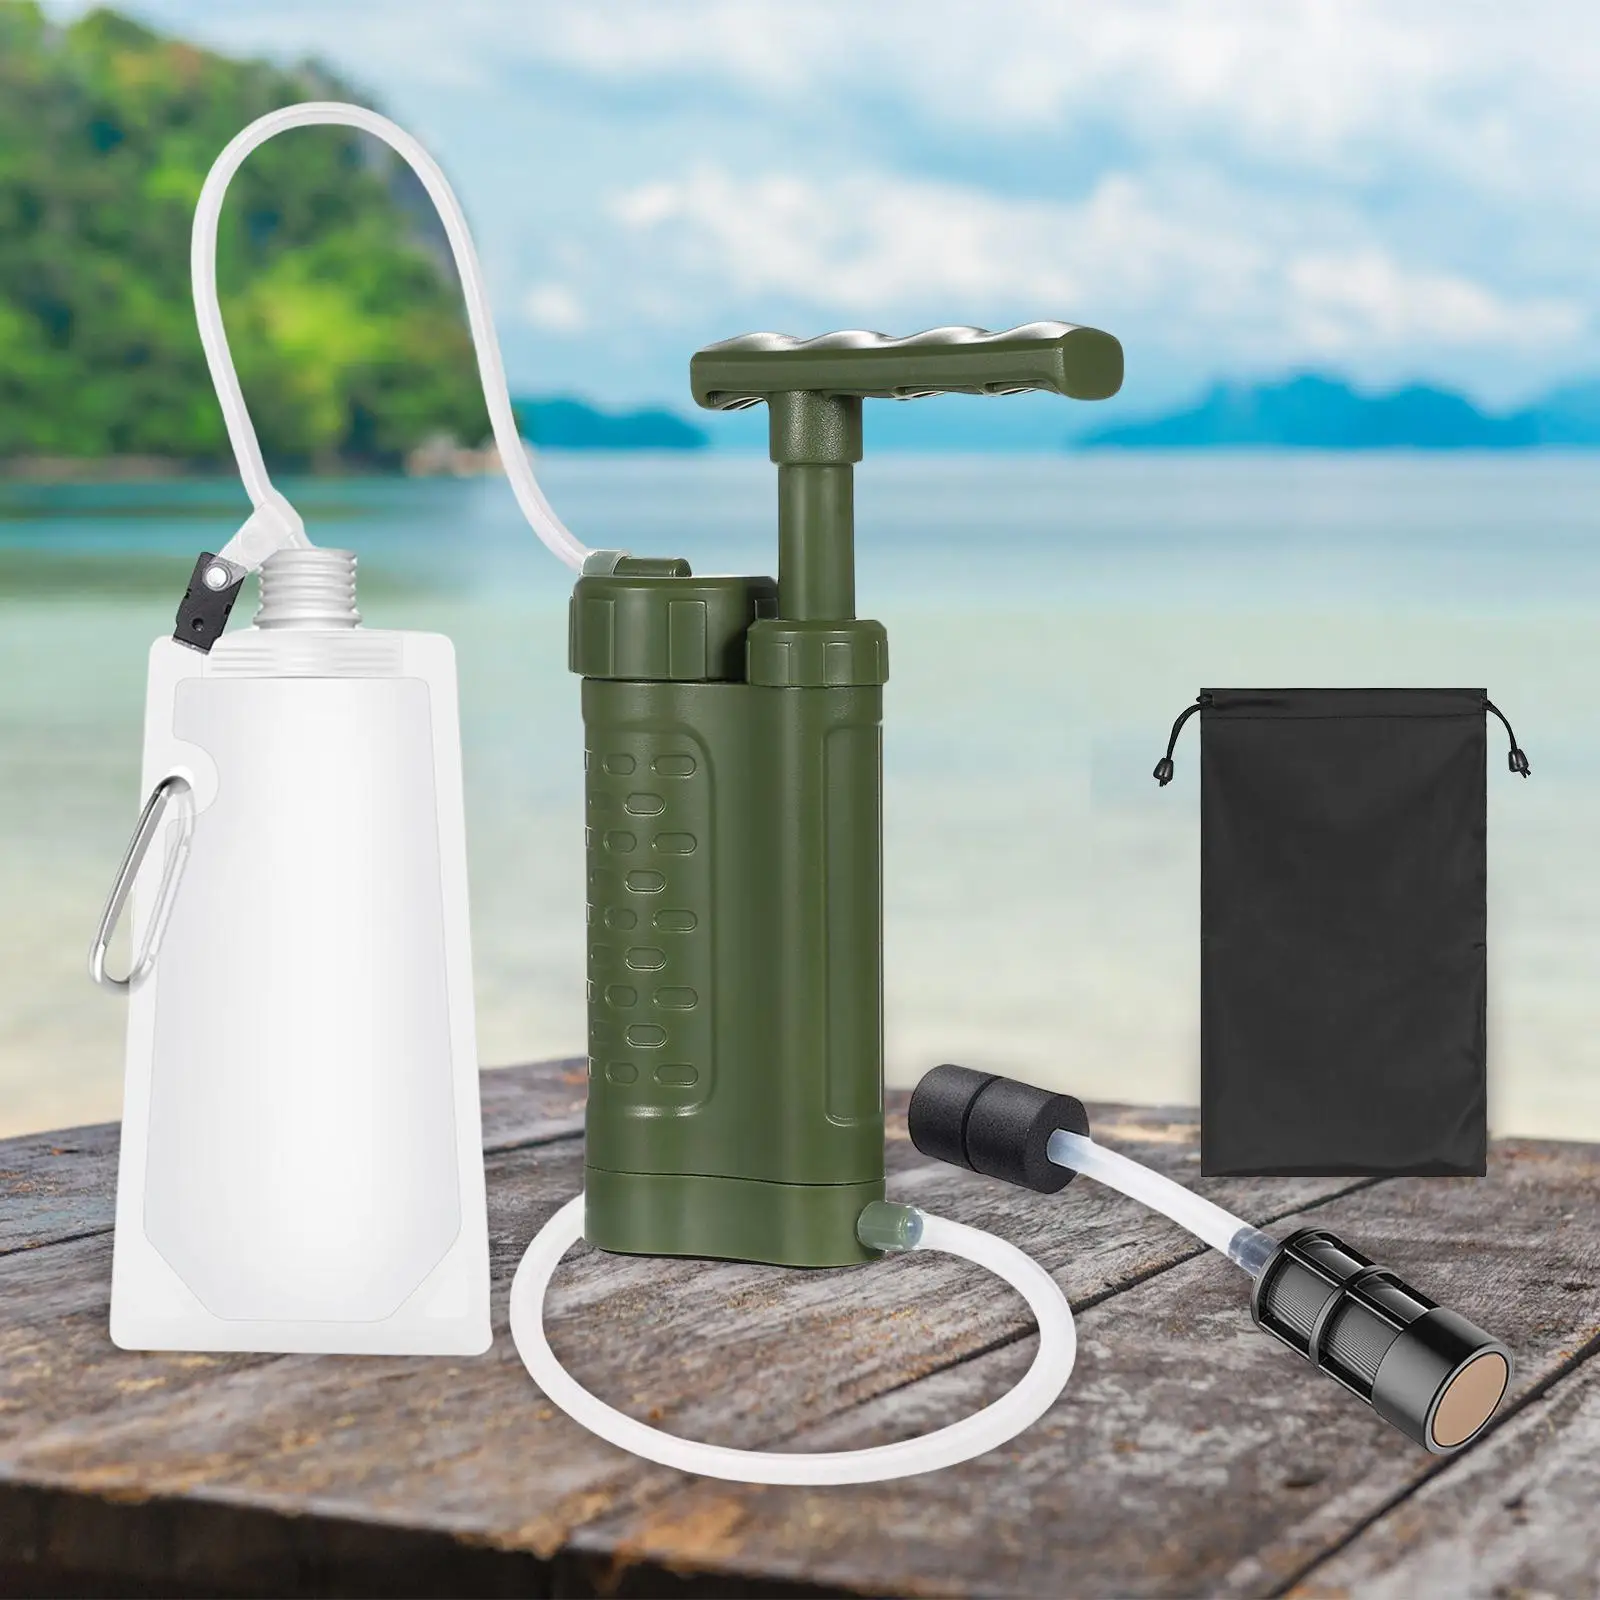 0.01 Micron Water Purifier Pump Water Purification 793 gallons W/ Bag Purifier Survival for Backpacking Fishing Hiking Outdoor